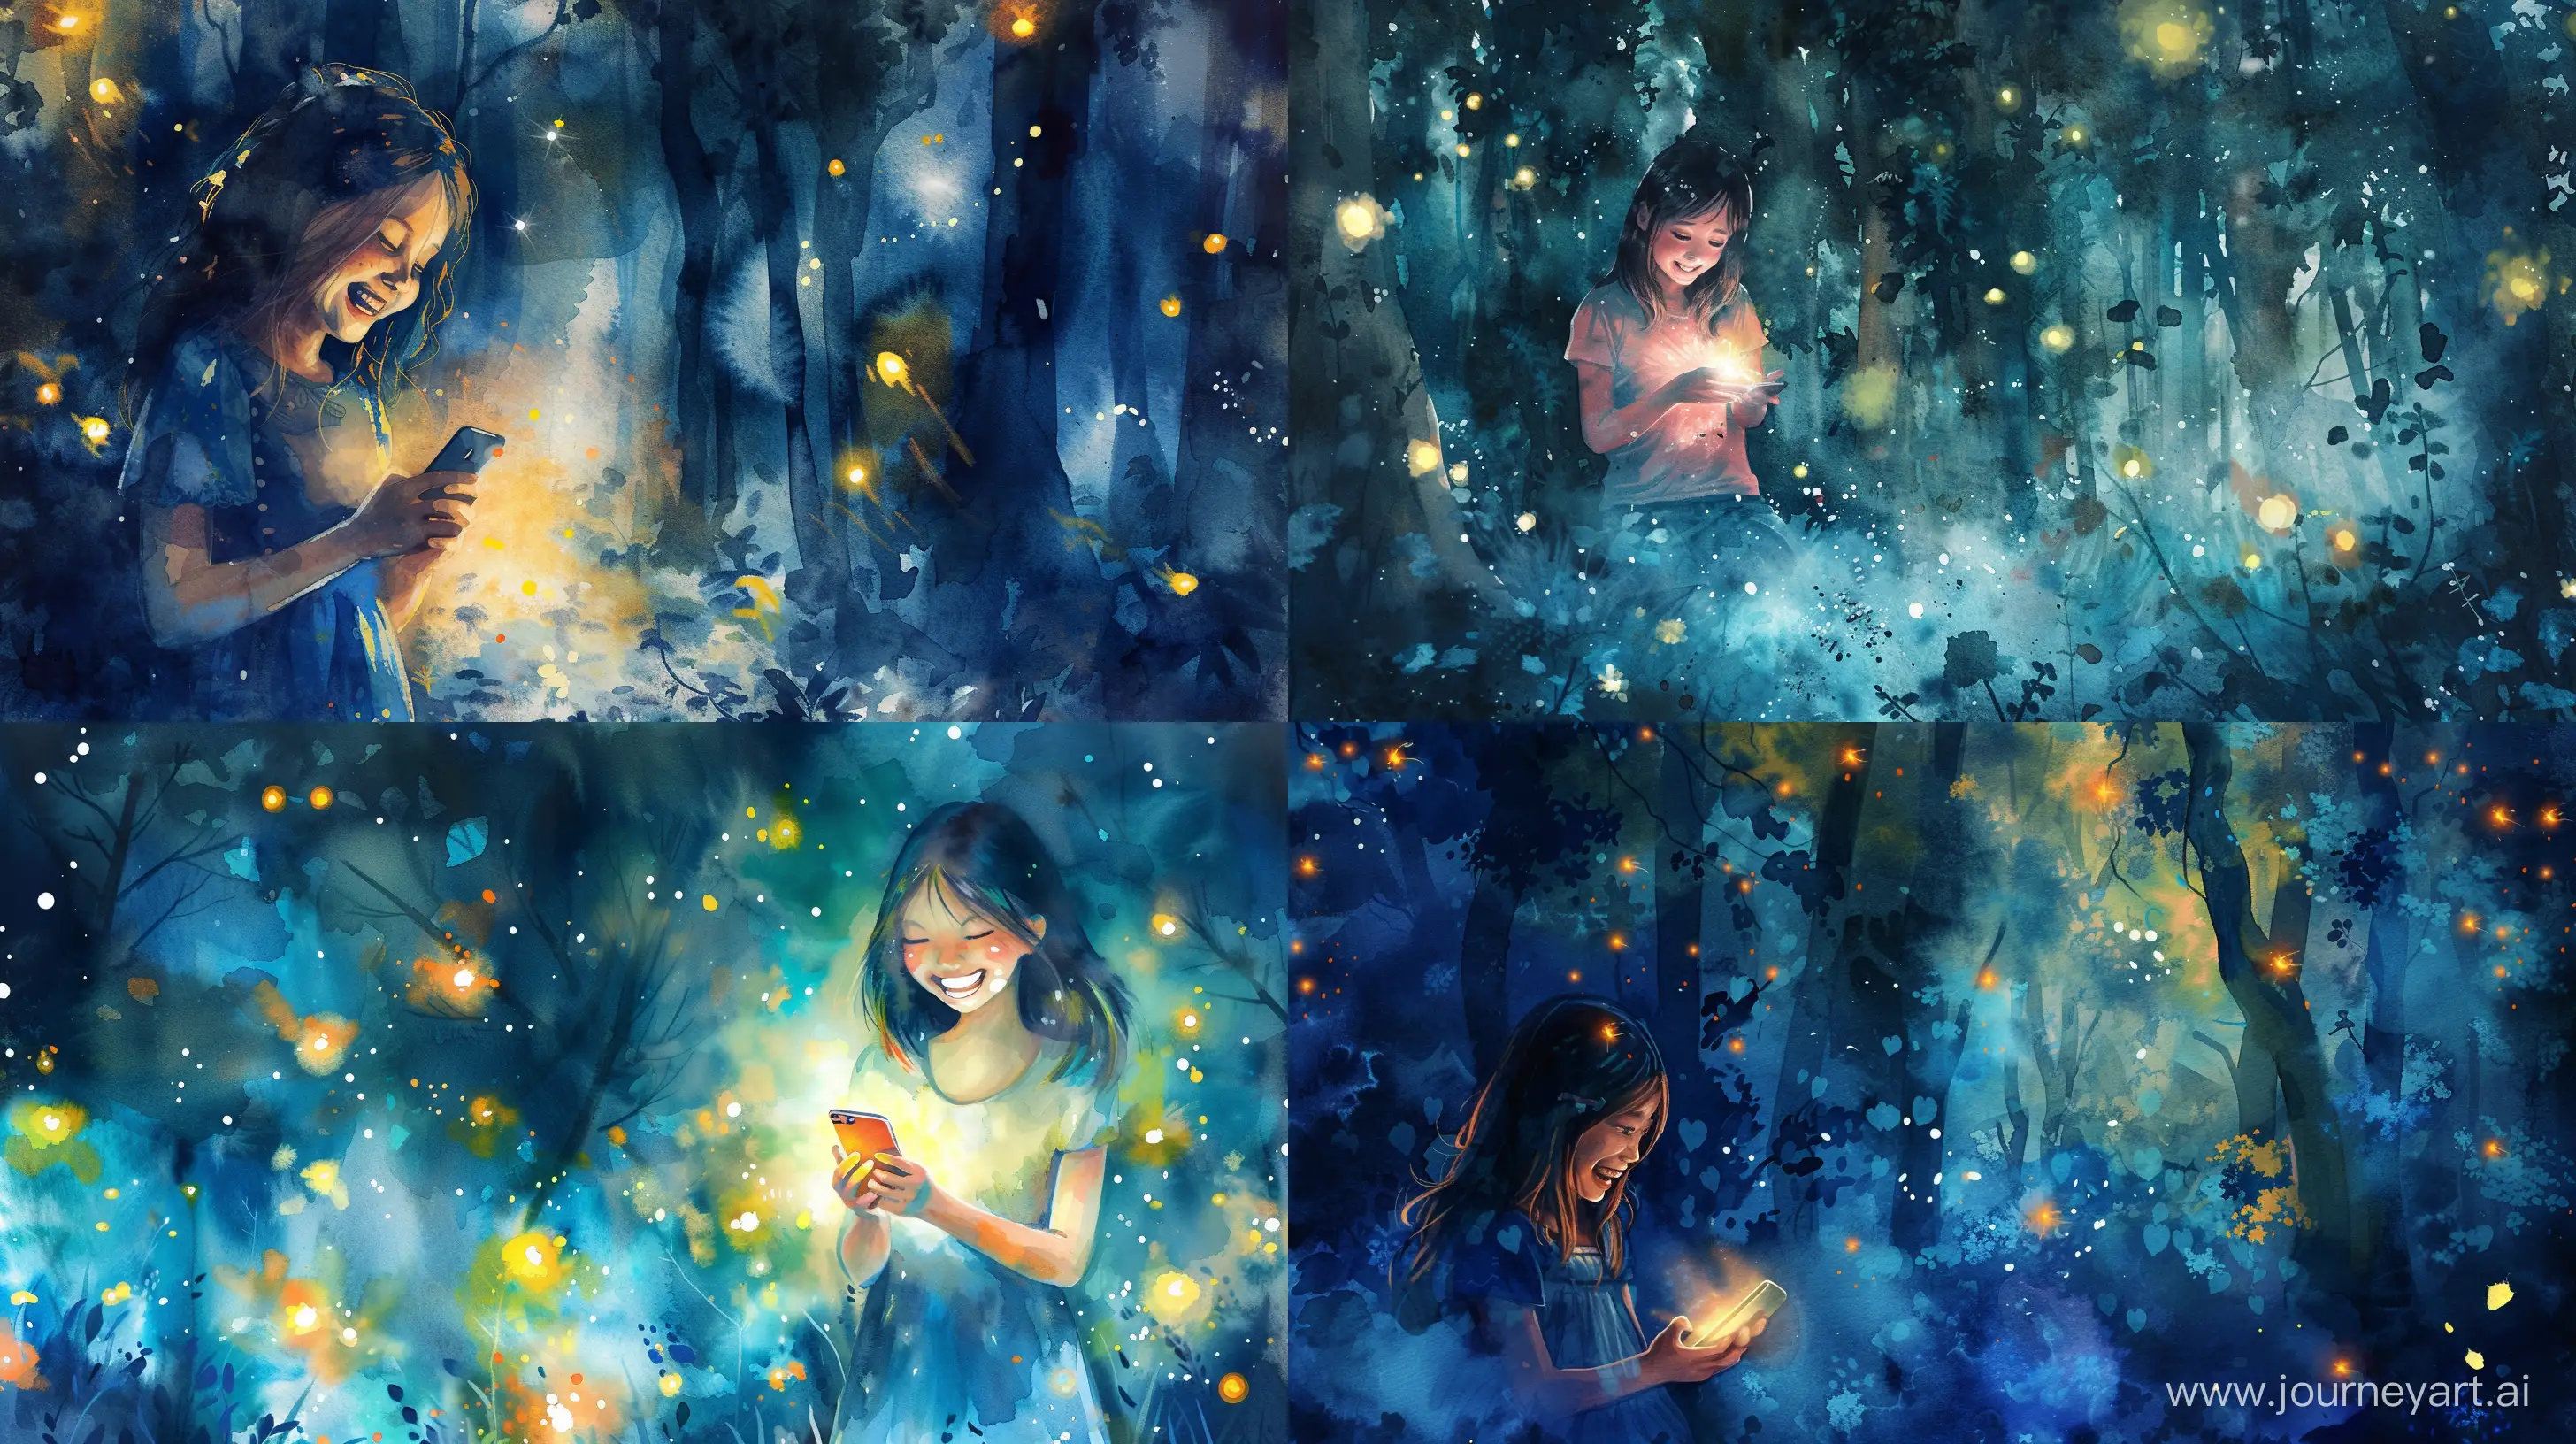 A delighted girl, absorbed in her mobile phone's glow, laughter resonating in a magical forest at night, cinematic lighting accentuating the mystique, fireflies dancing around, creating an enchanting and whimsical atmosphere, Artwork, watercolor painting, --ar 16:9 --v 6 --v 6 --ar 1:1 --no 49386